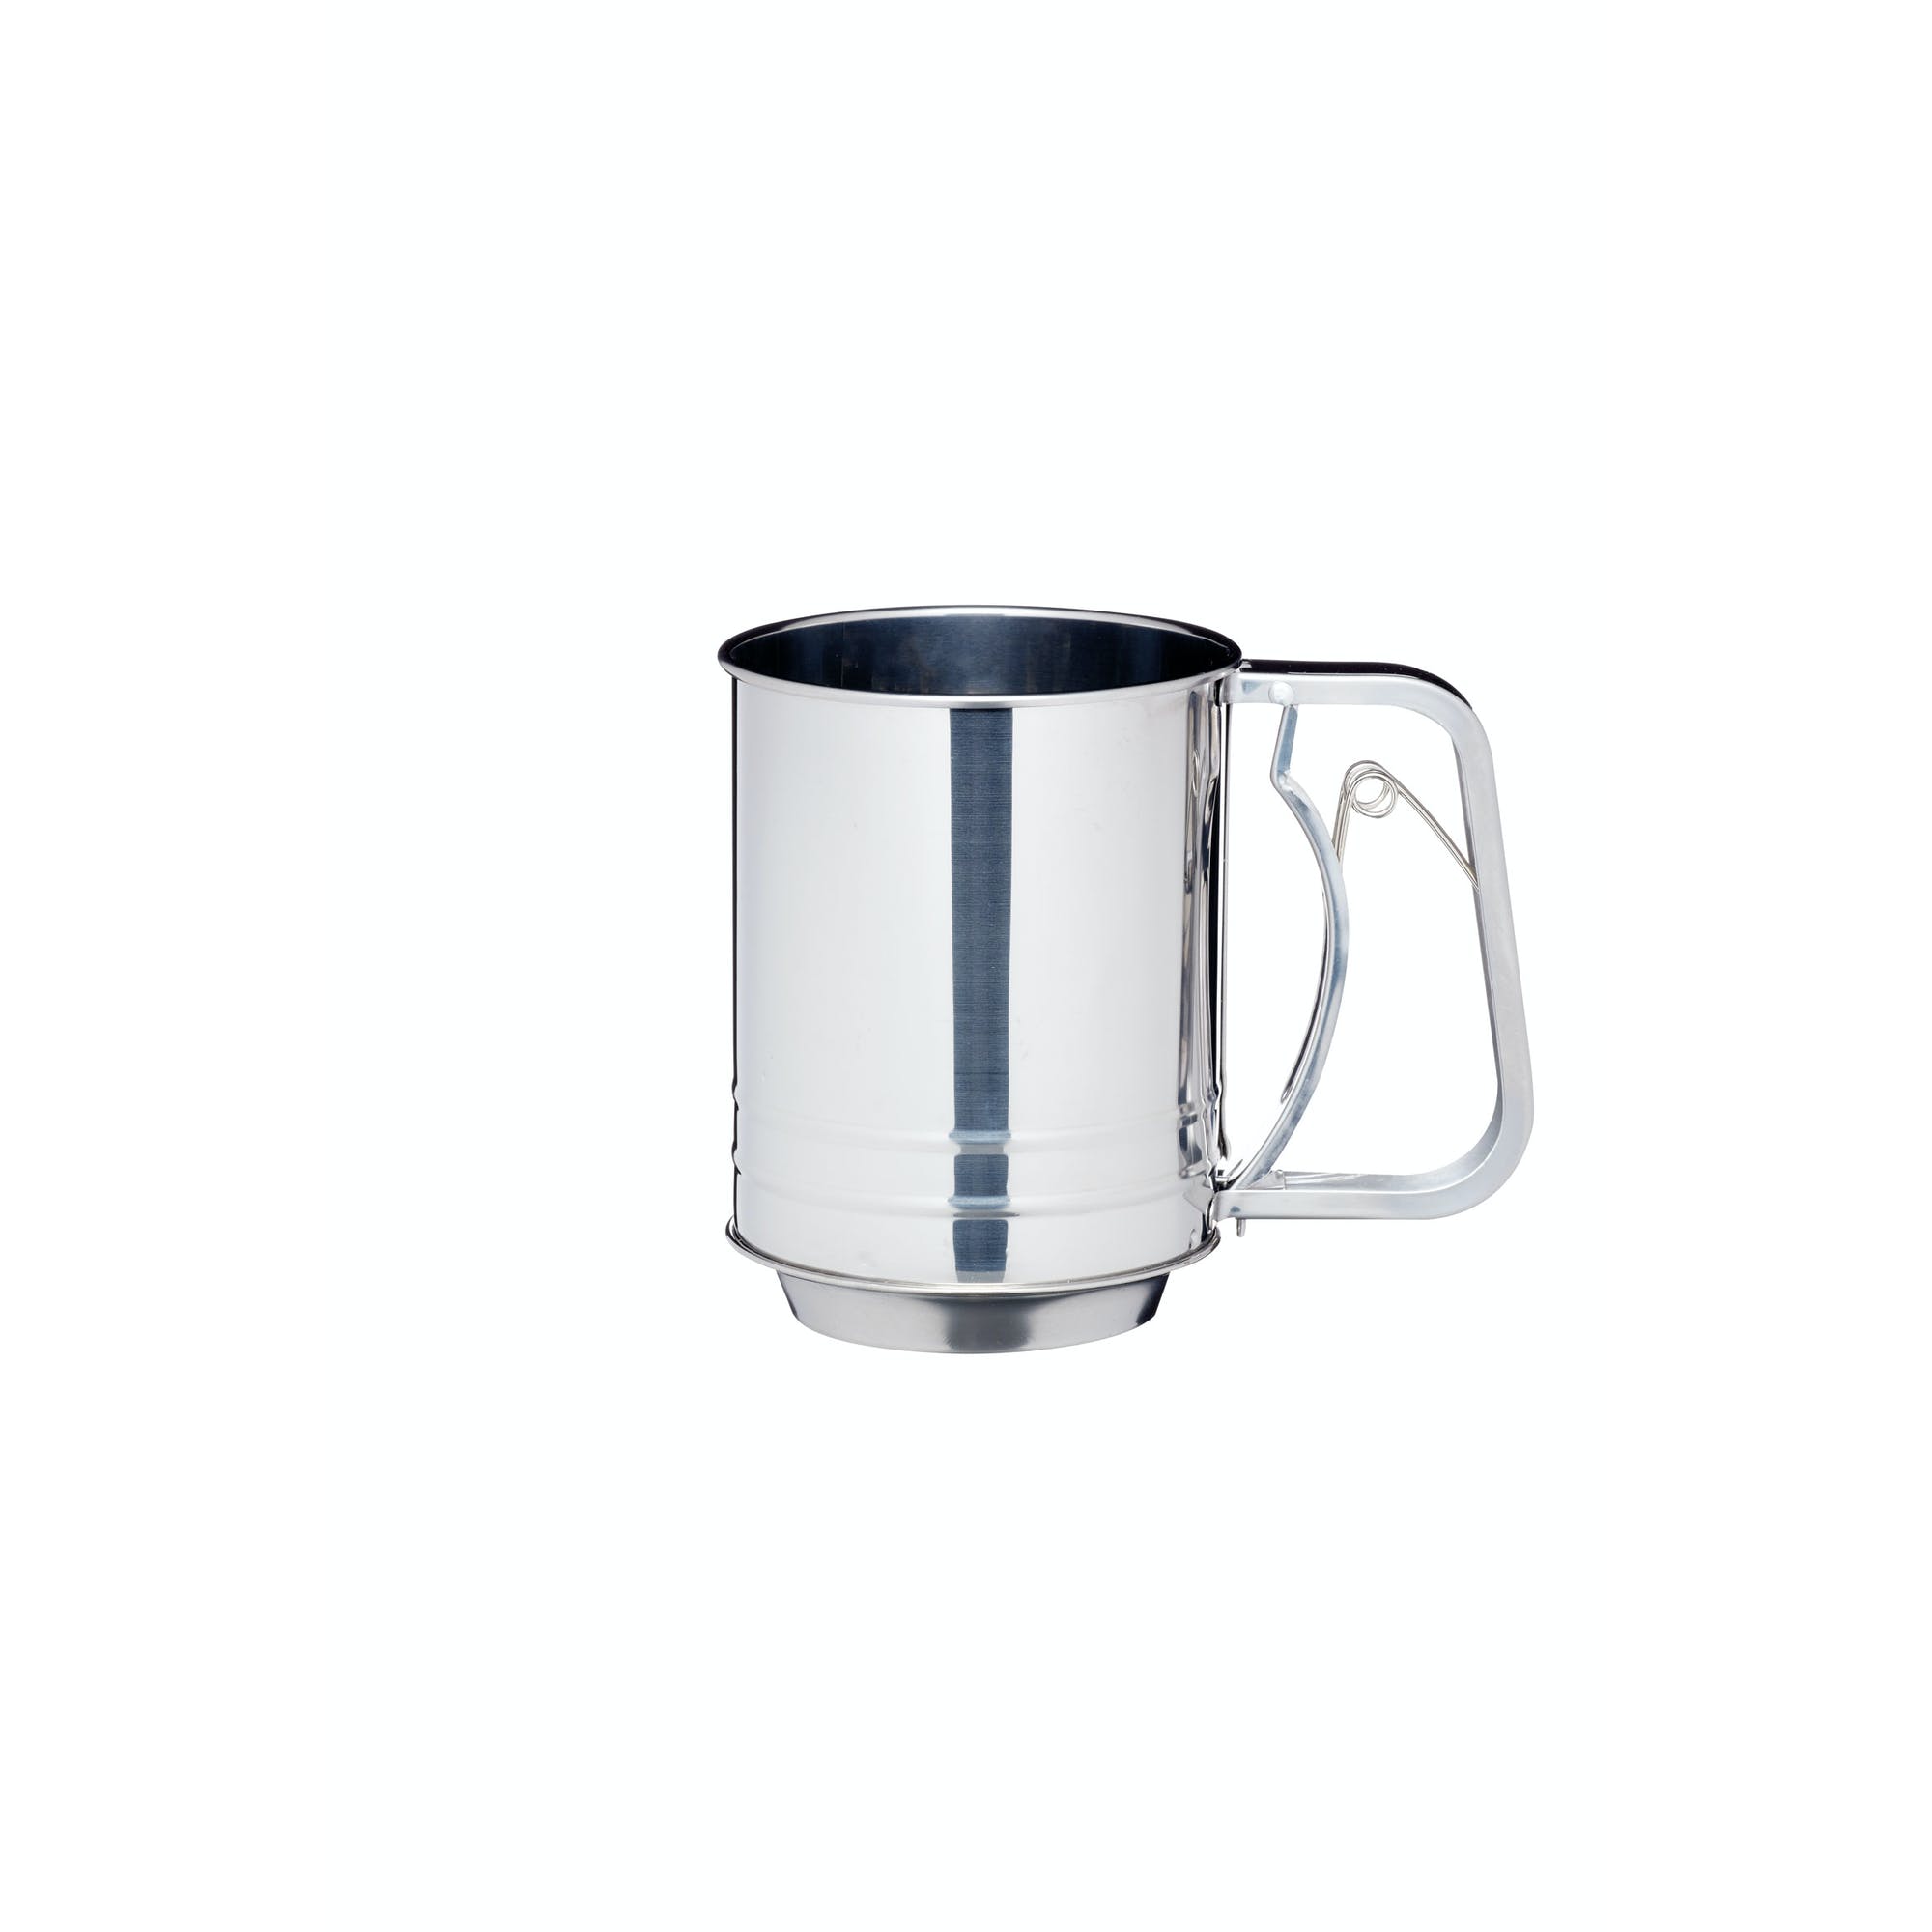 KitchenCraft Stainless Steel Trigger Action Flour Sifter - The Cooks Cupboard Ltd